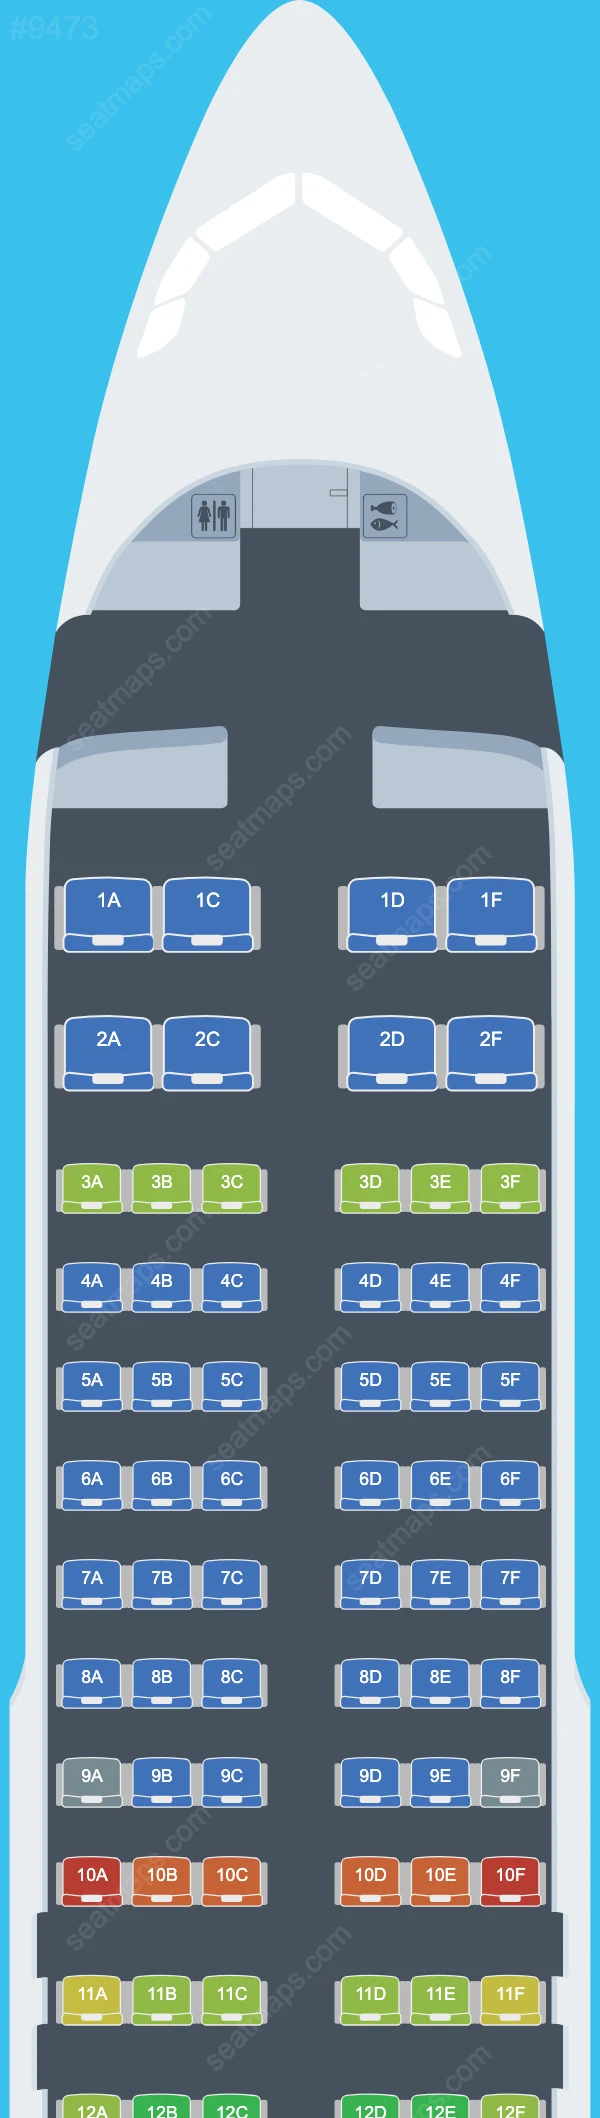 Bamboo Airways Airbus A320 Seat Maps A320-200 V.1